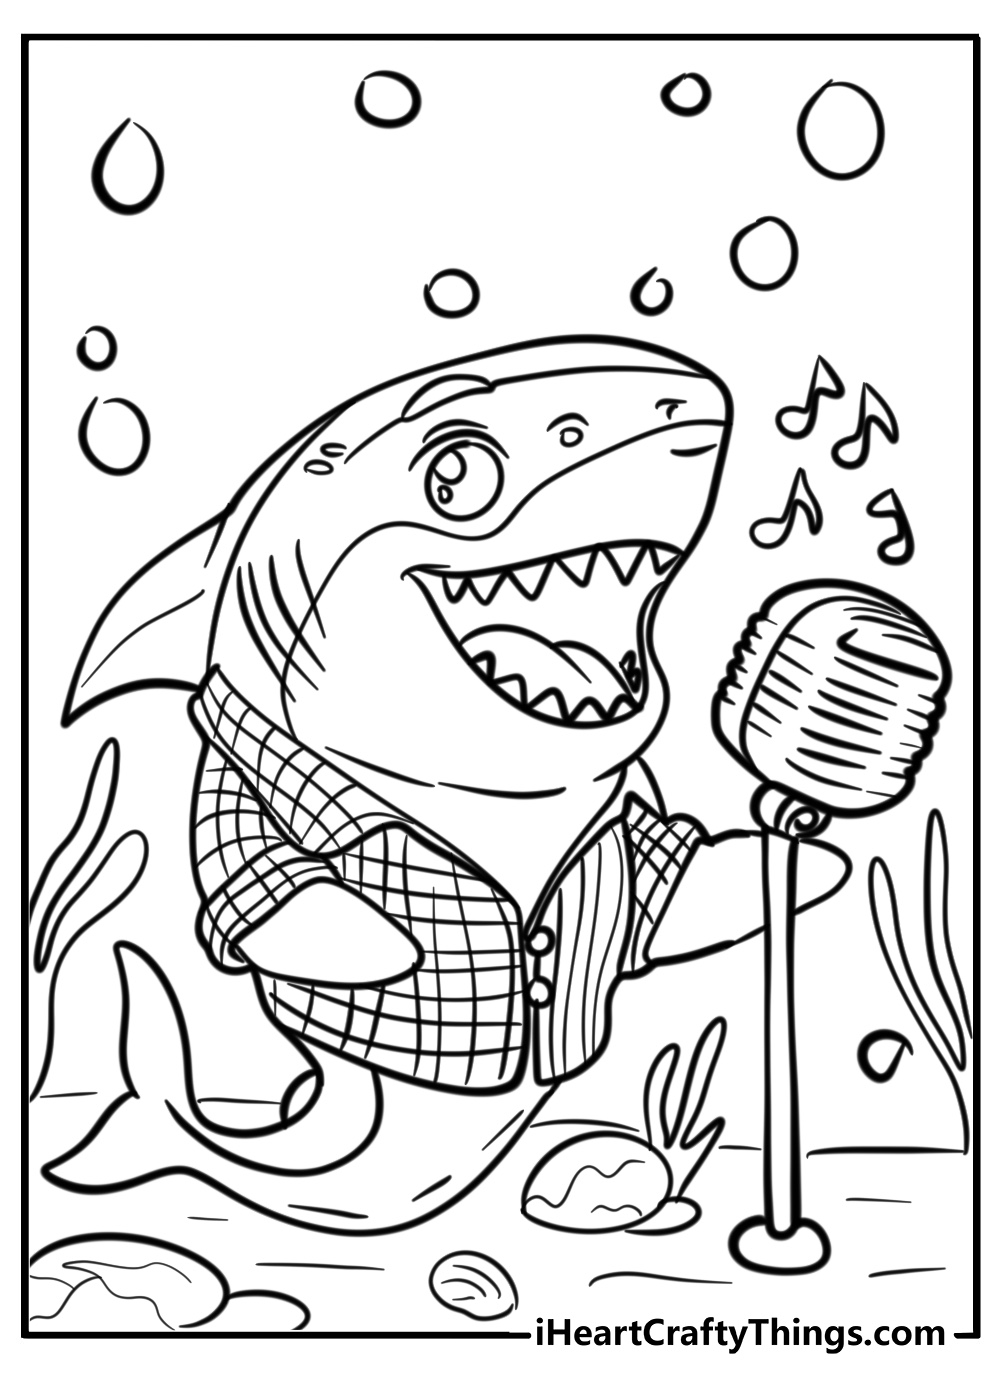 Shark coloring page in shirt singing on microphone